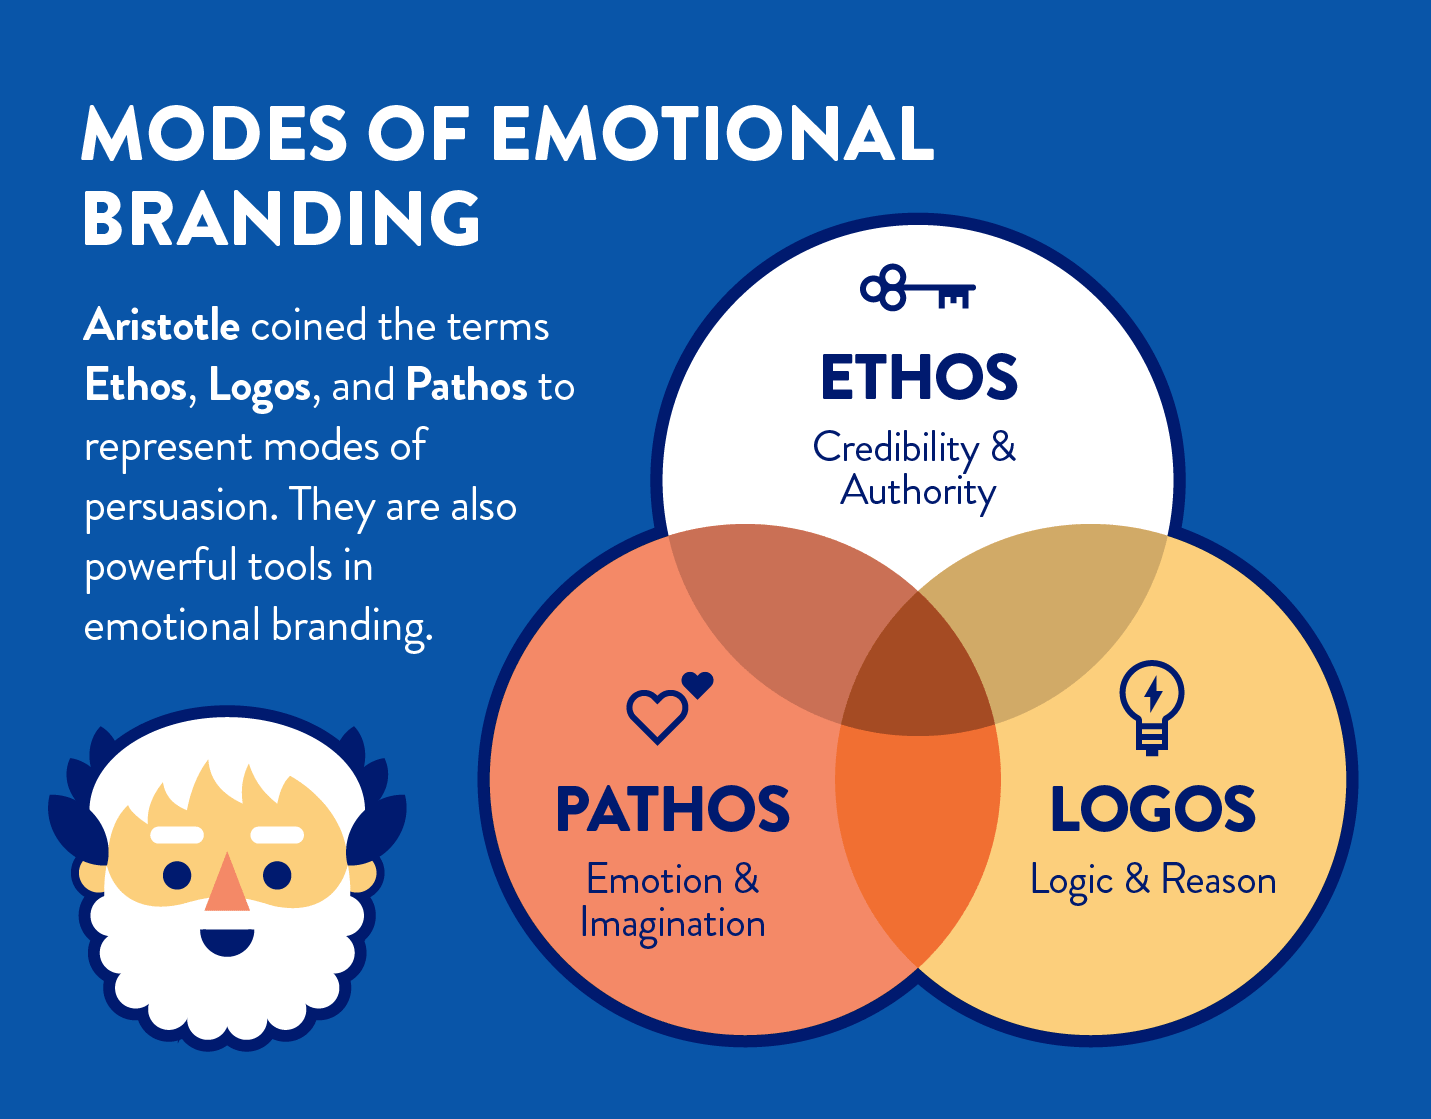 emotional branding compared to aristotles modes of persuasion ethos, logos, and pathos